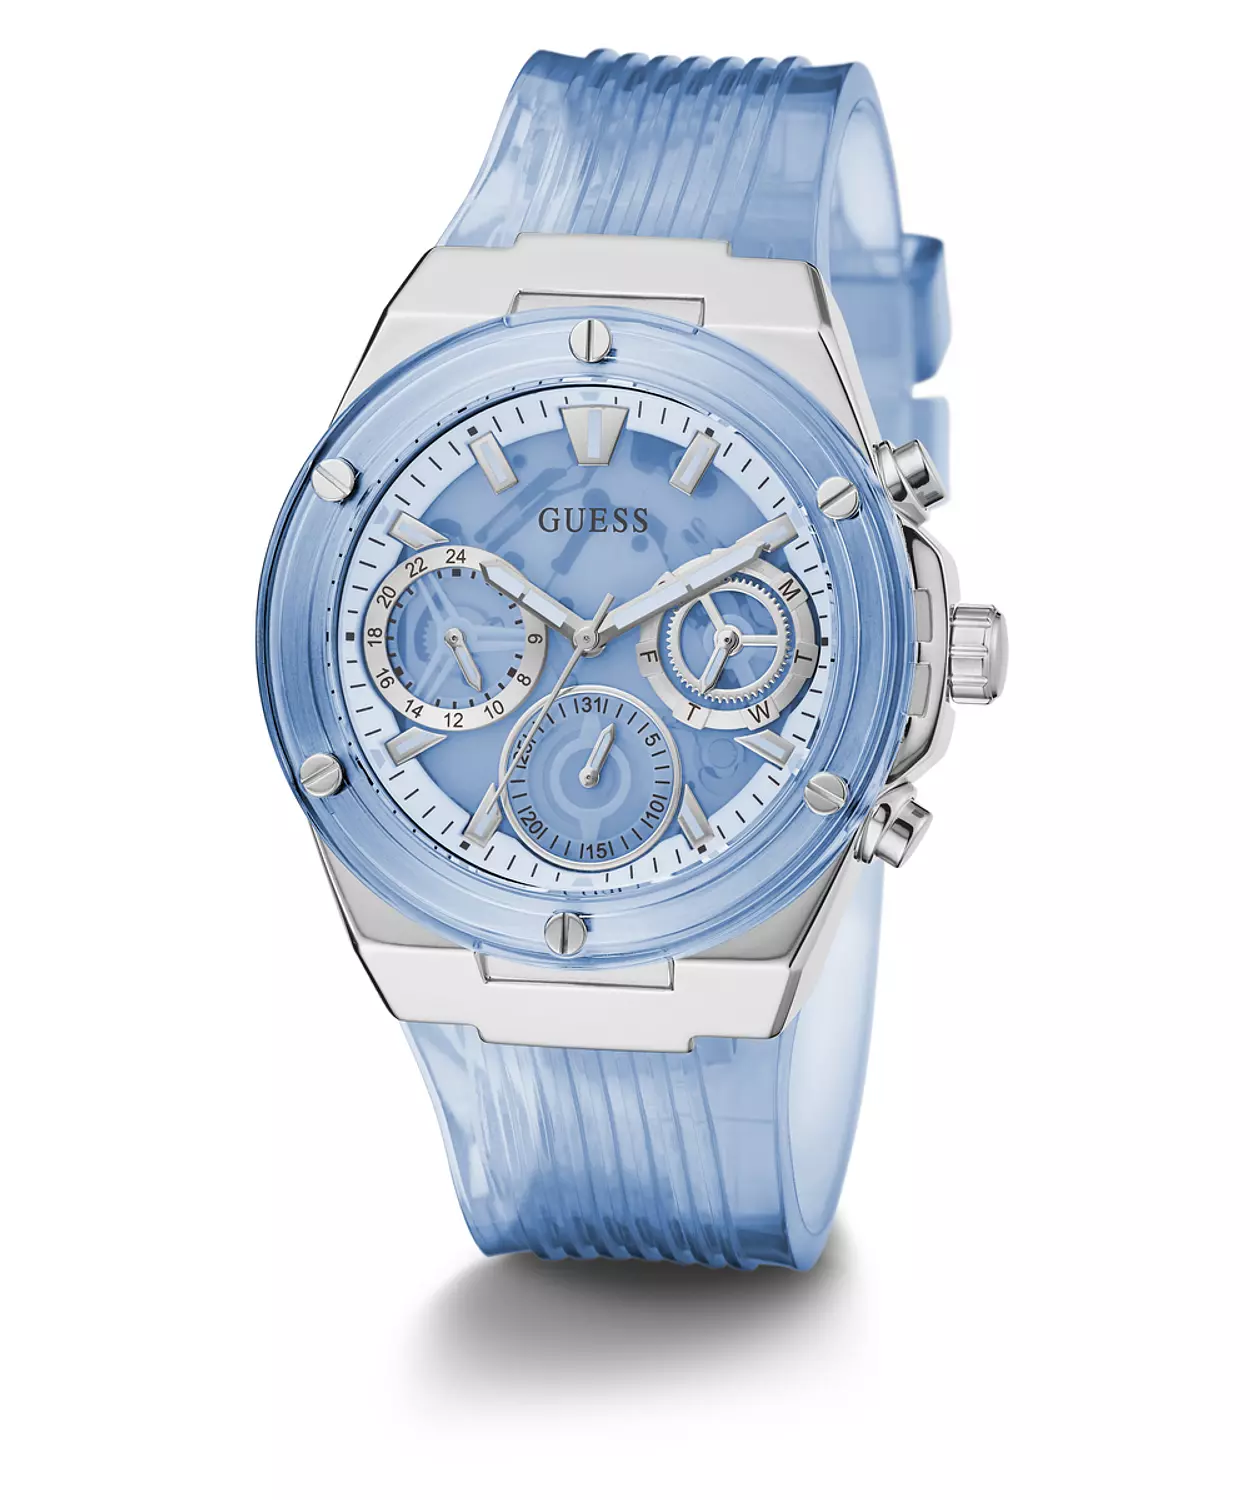 GUESS GW0409L1 ANALOG WATCH  For Women BlueBio-based PU Textured Strap  2